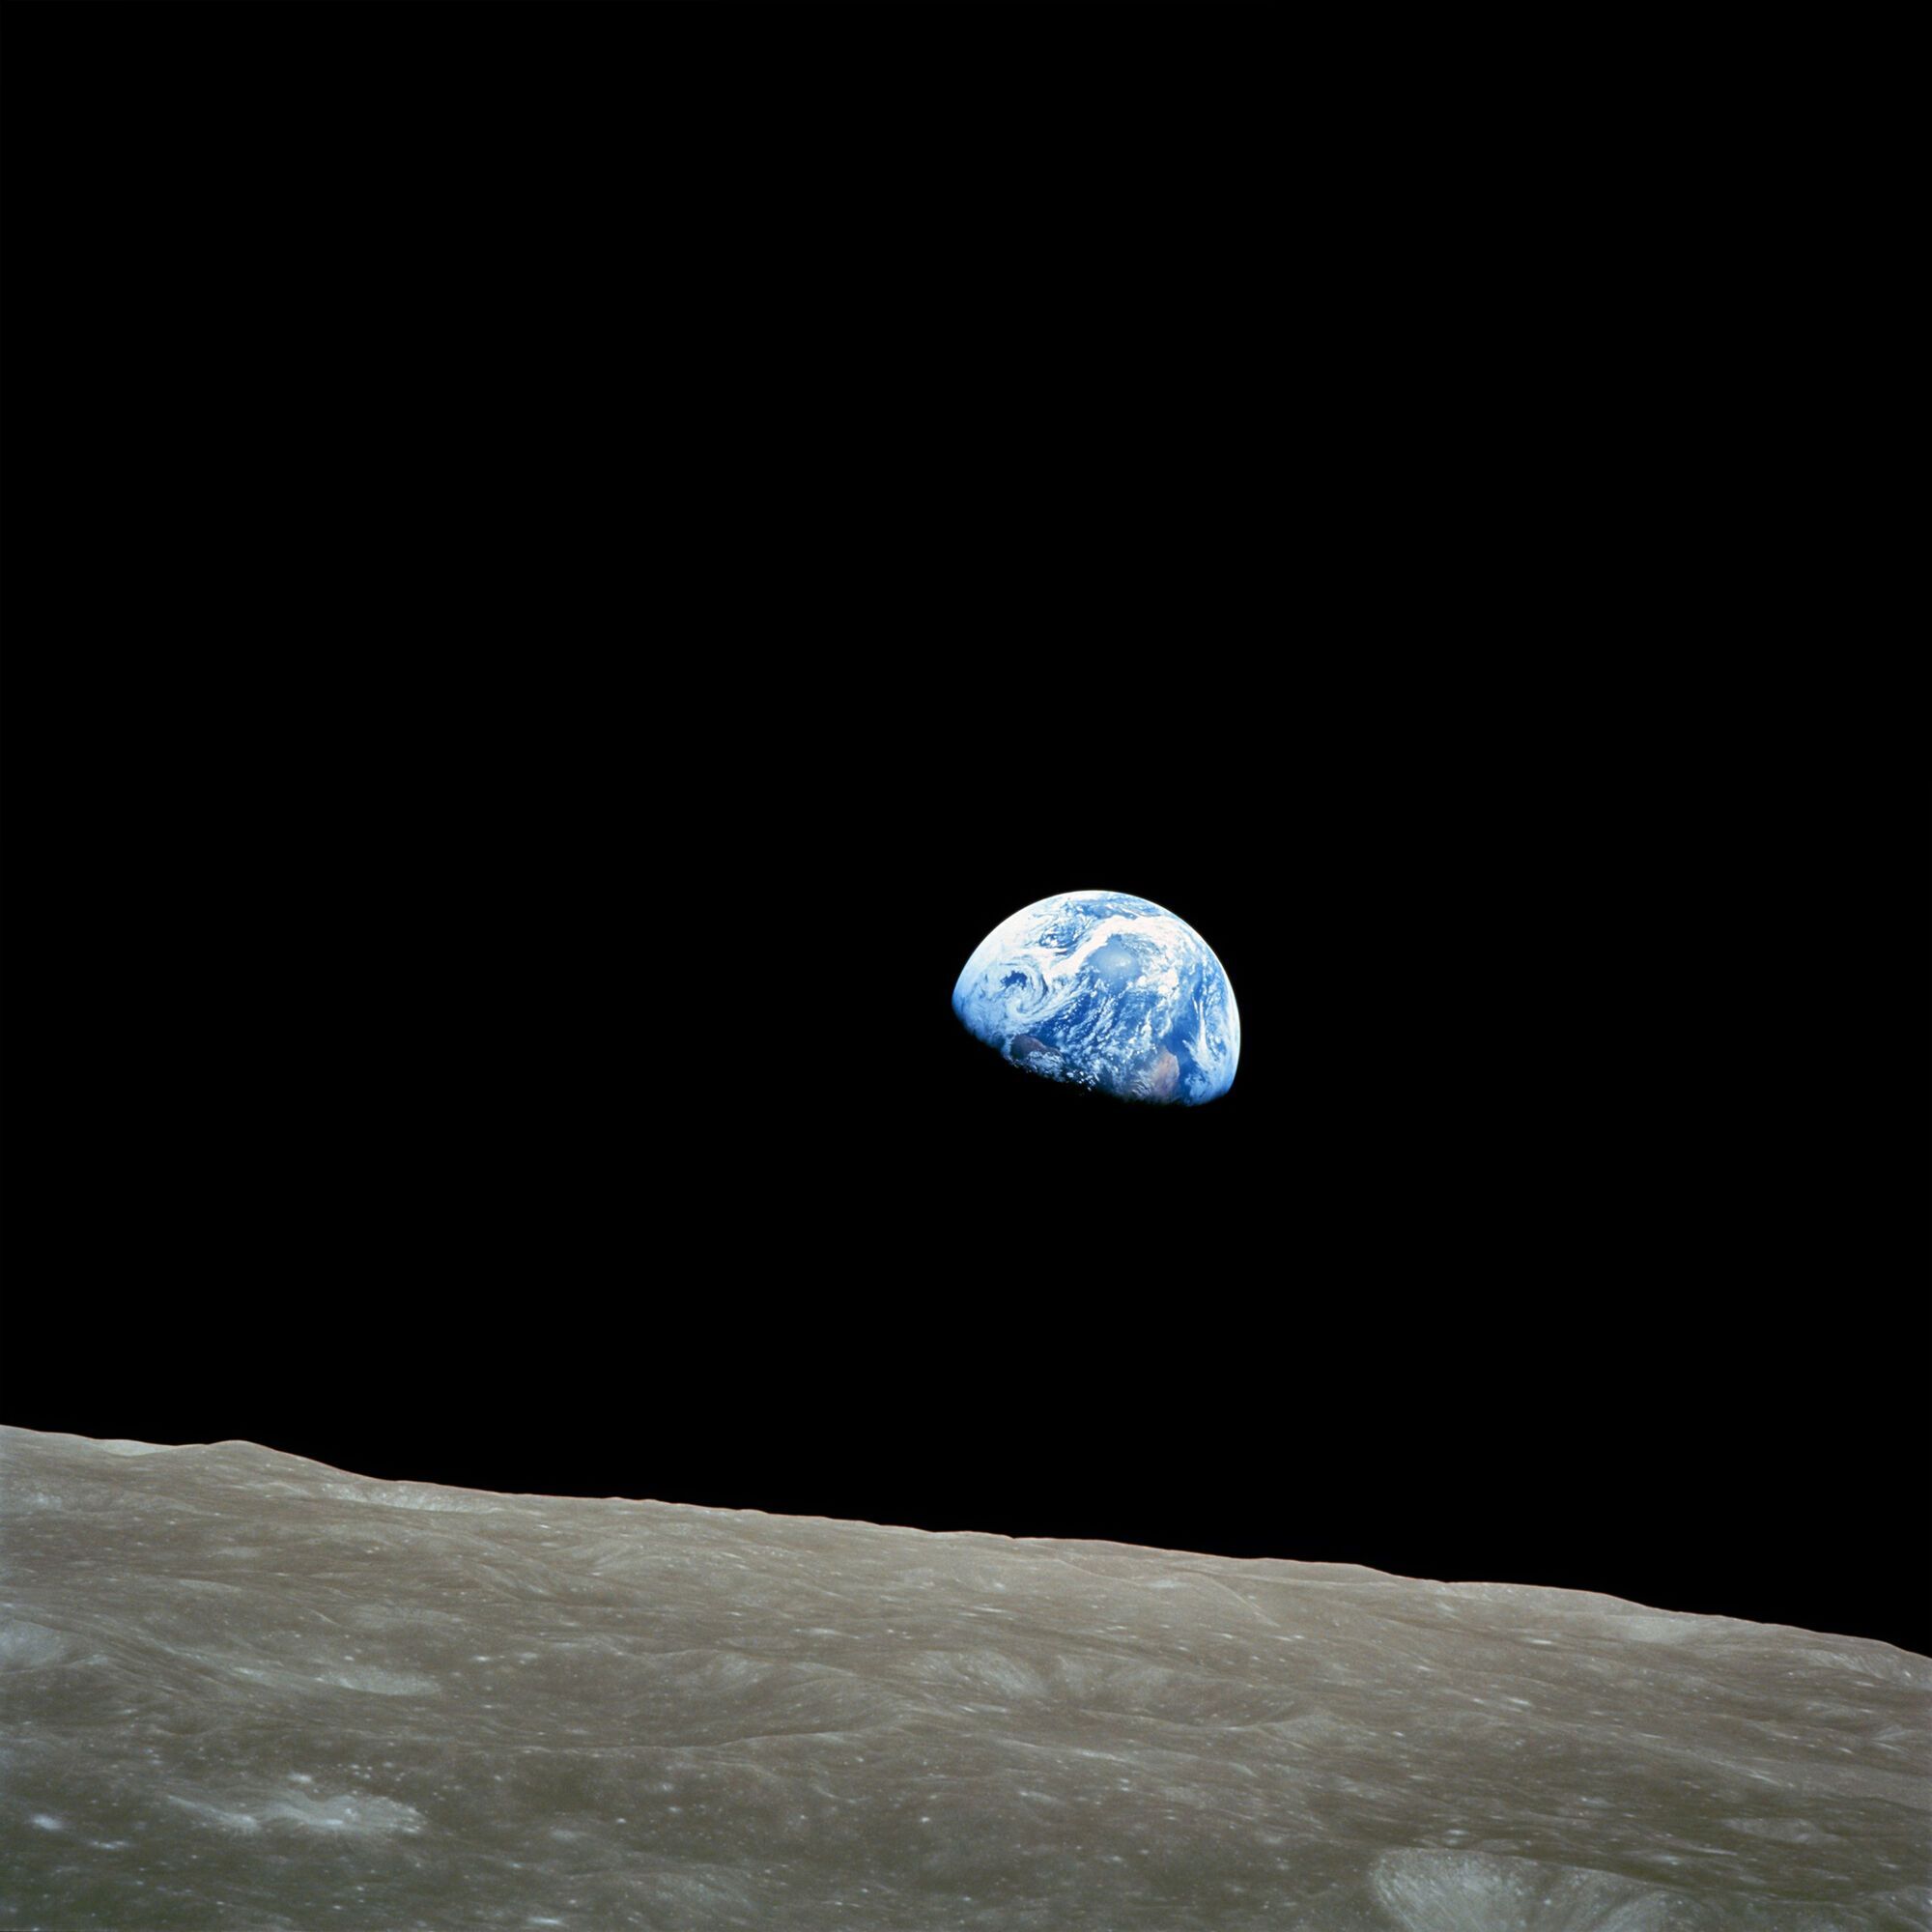 Earthrise over the Moon on December 24, 1968